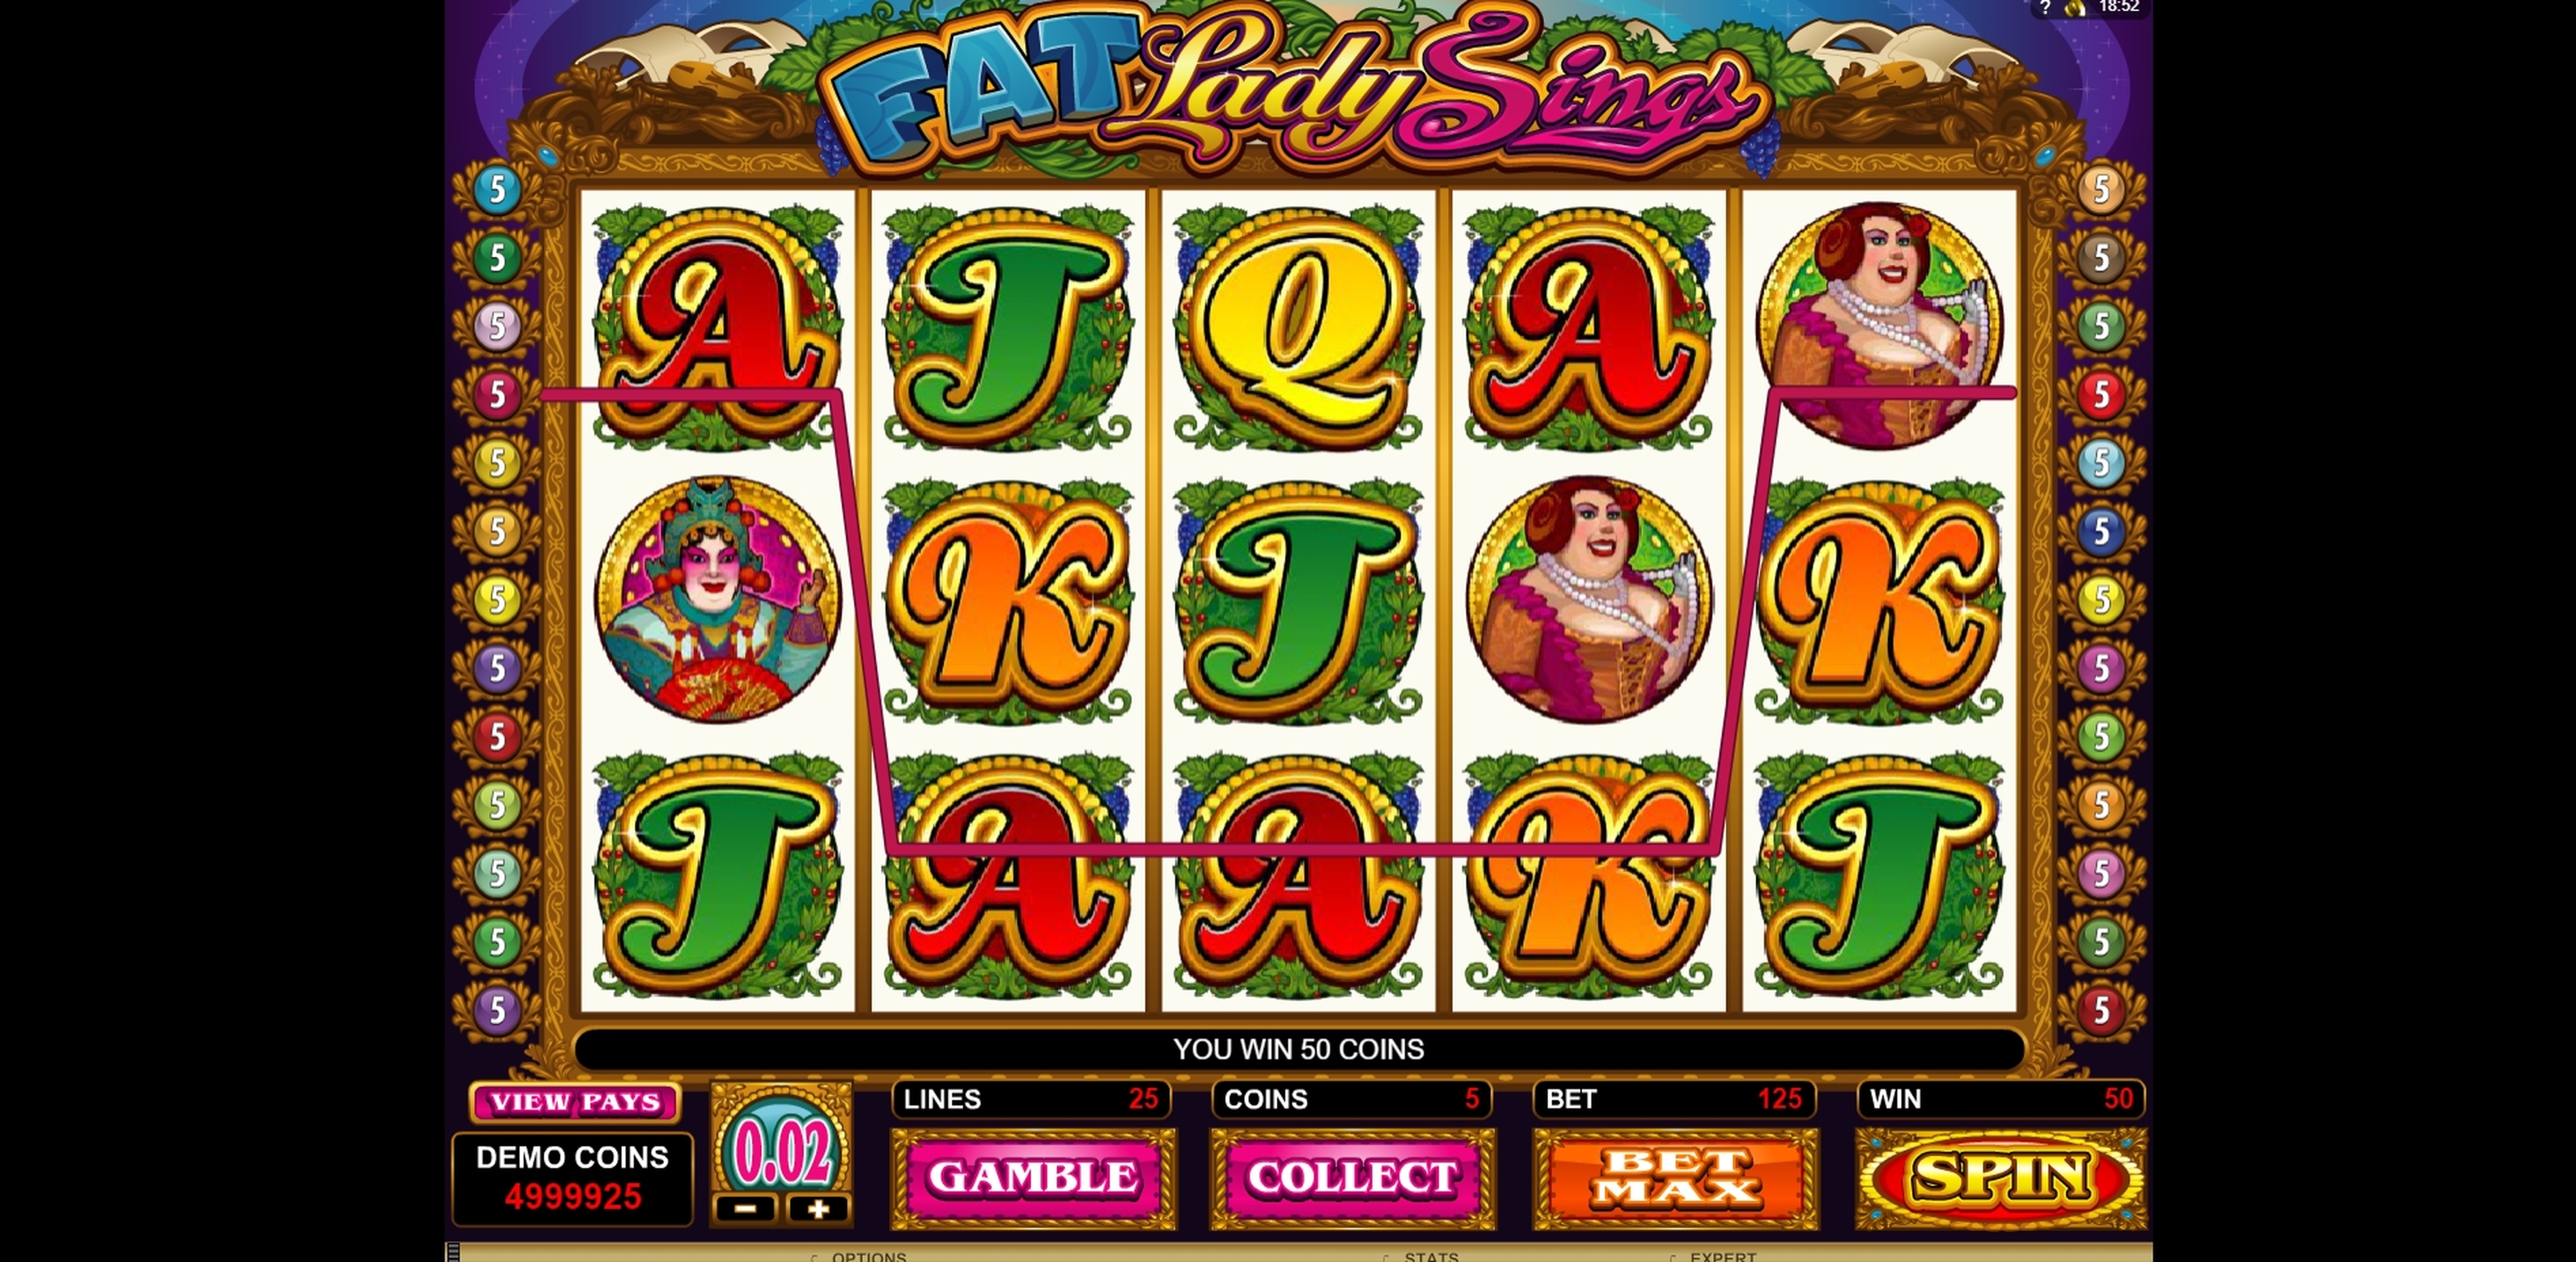 Win Money in Fat Lady Sings Free Slot Game by Microgaming